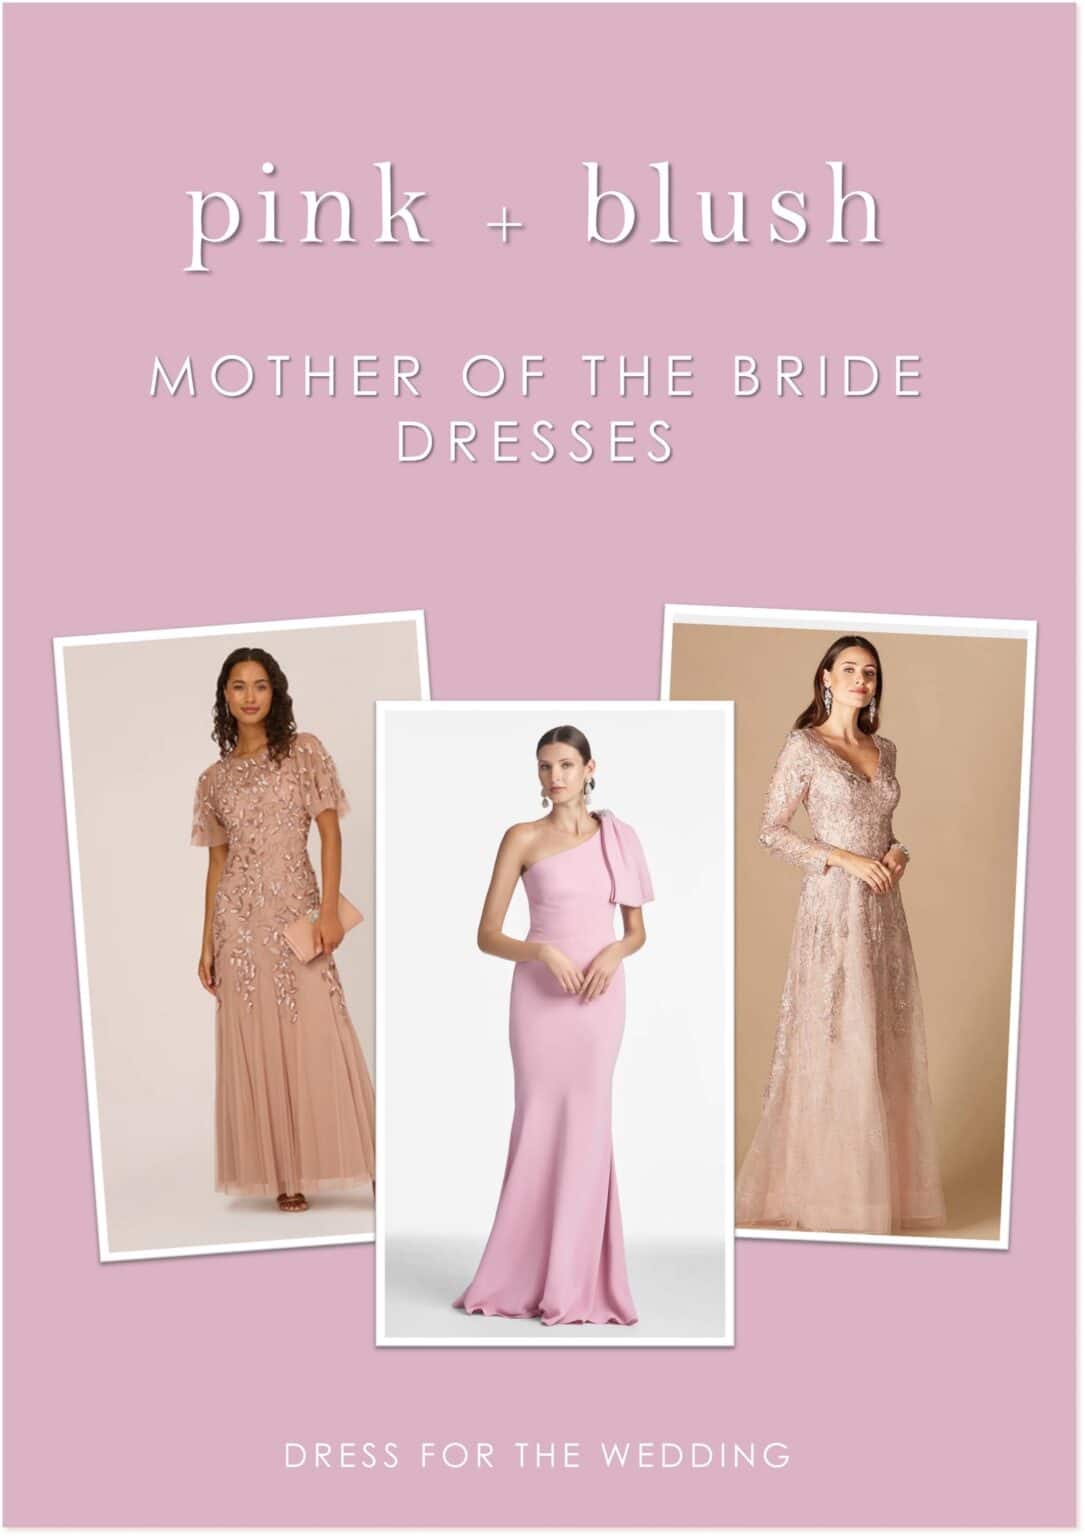 70 of the Best Blush and Pink Mother of the Bride Dresses - Dress for ...